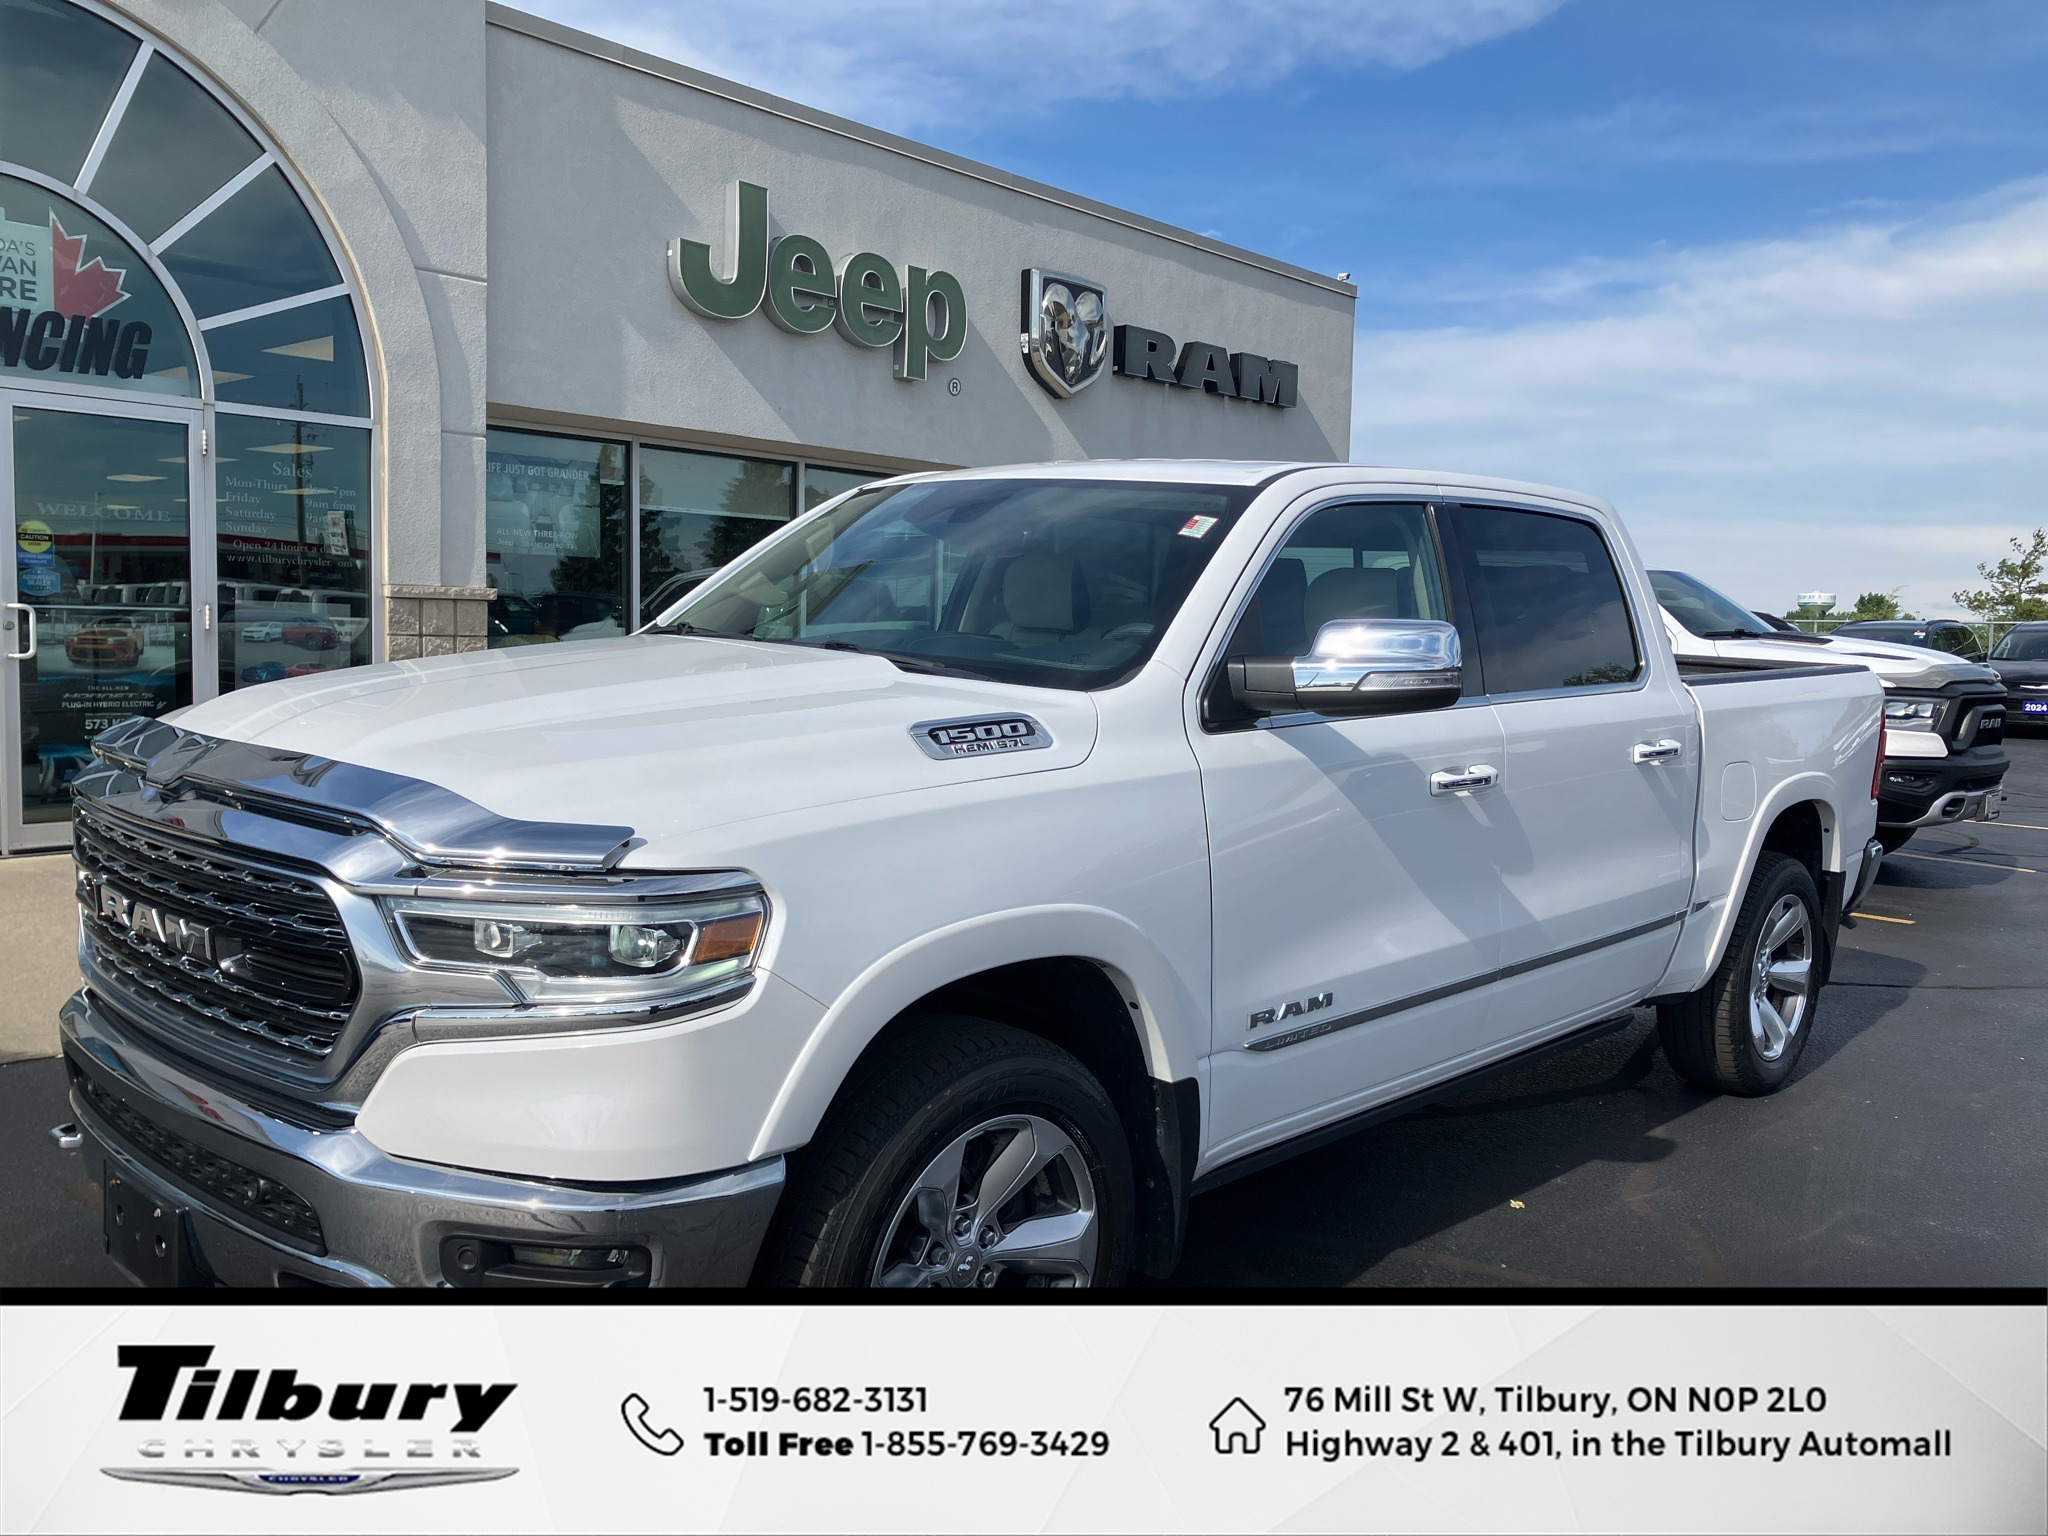 2019 Ram 1500 One Owner, New Arrival